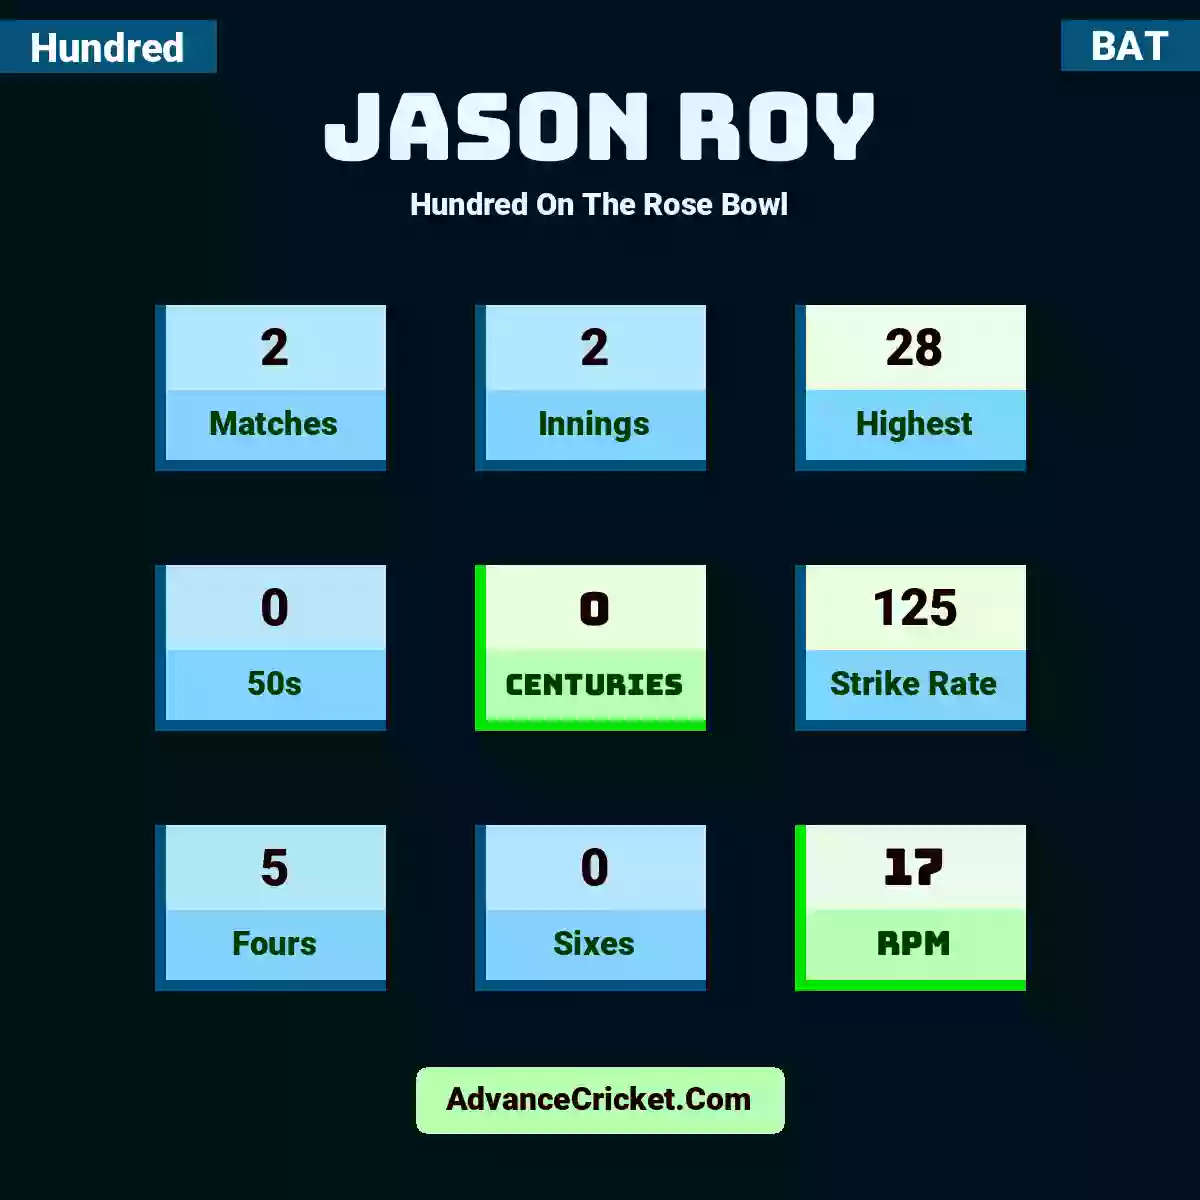 Jason Roy Hundred  On The Rose Bowl, Jason Roy played 2 matches, scored 28 runs as highest, 0 half-centuries, and 0 centuries, with a strike rate of 125. J.Roy hit 5 fours and 0 sixes, with an RPM of 17.